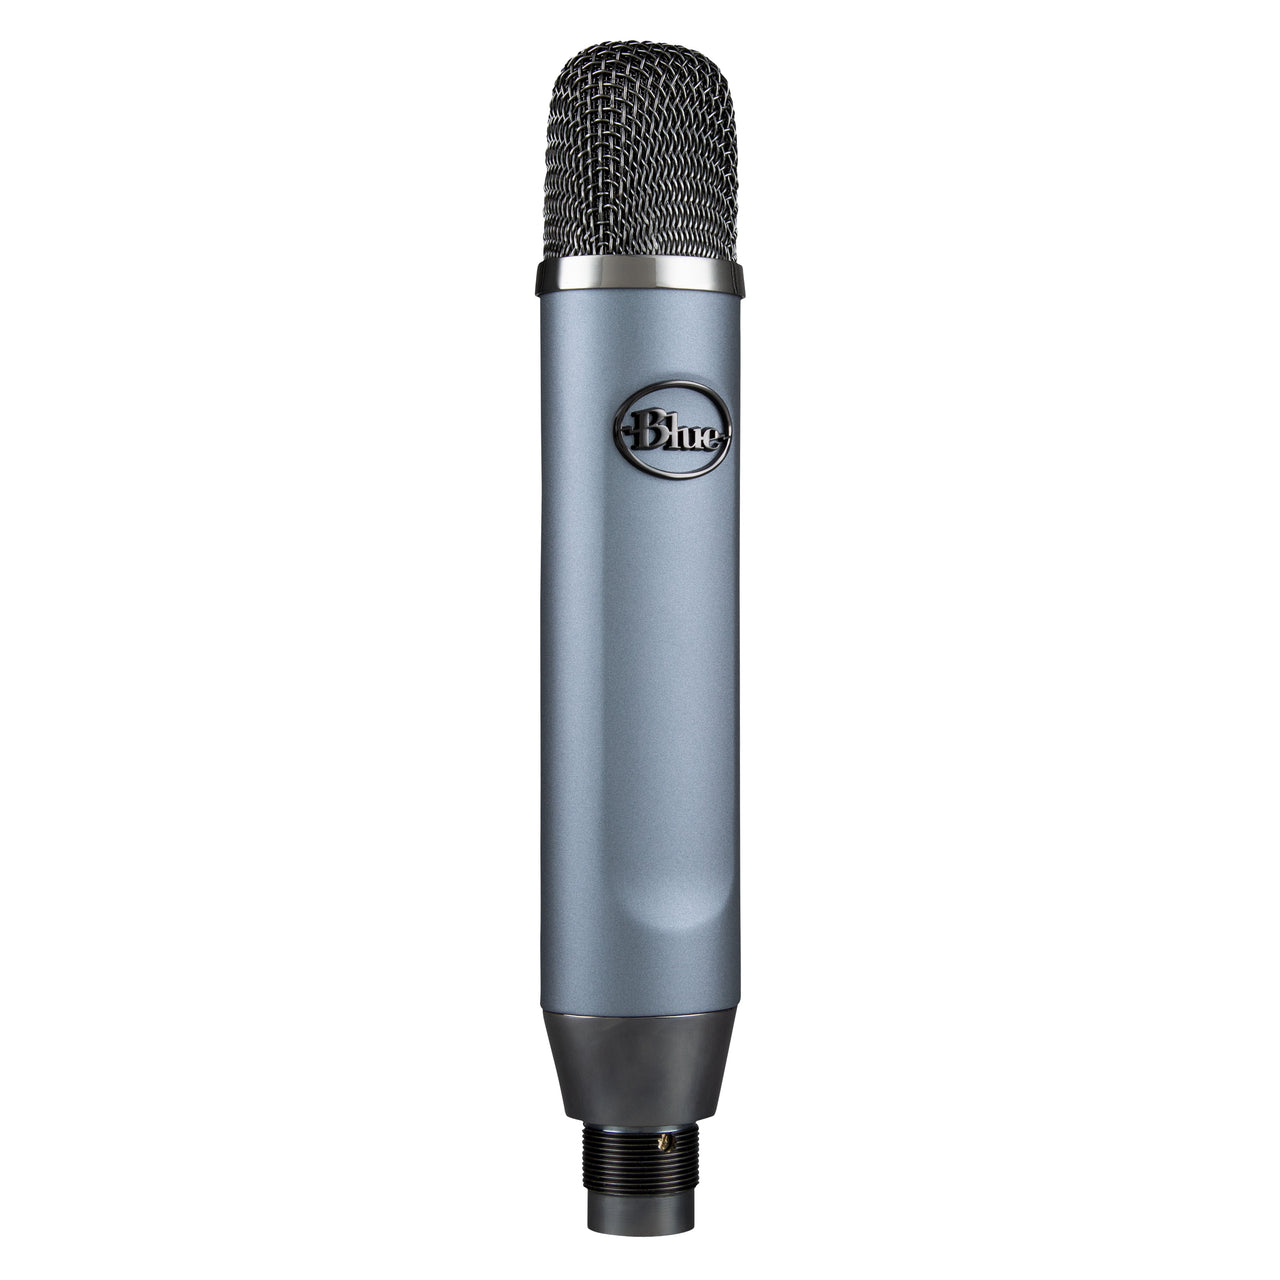 Blue Microphones Ember Small-diaphragm Condenser Microphone Small-diaphragm Cardioid Condenser Microphone with 40Hz-20kHz Frequency Response